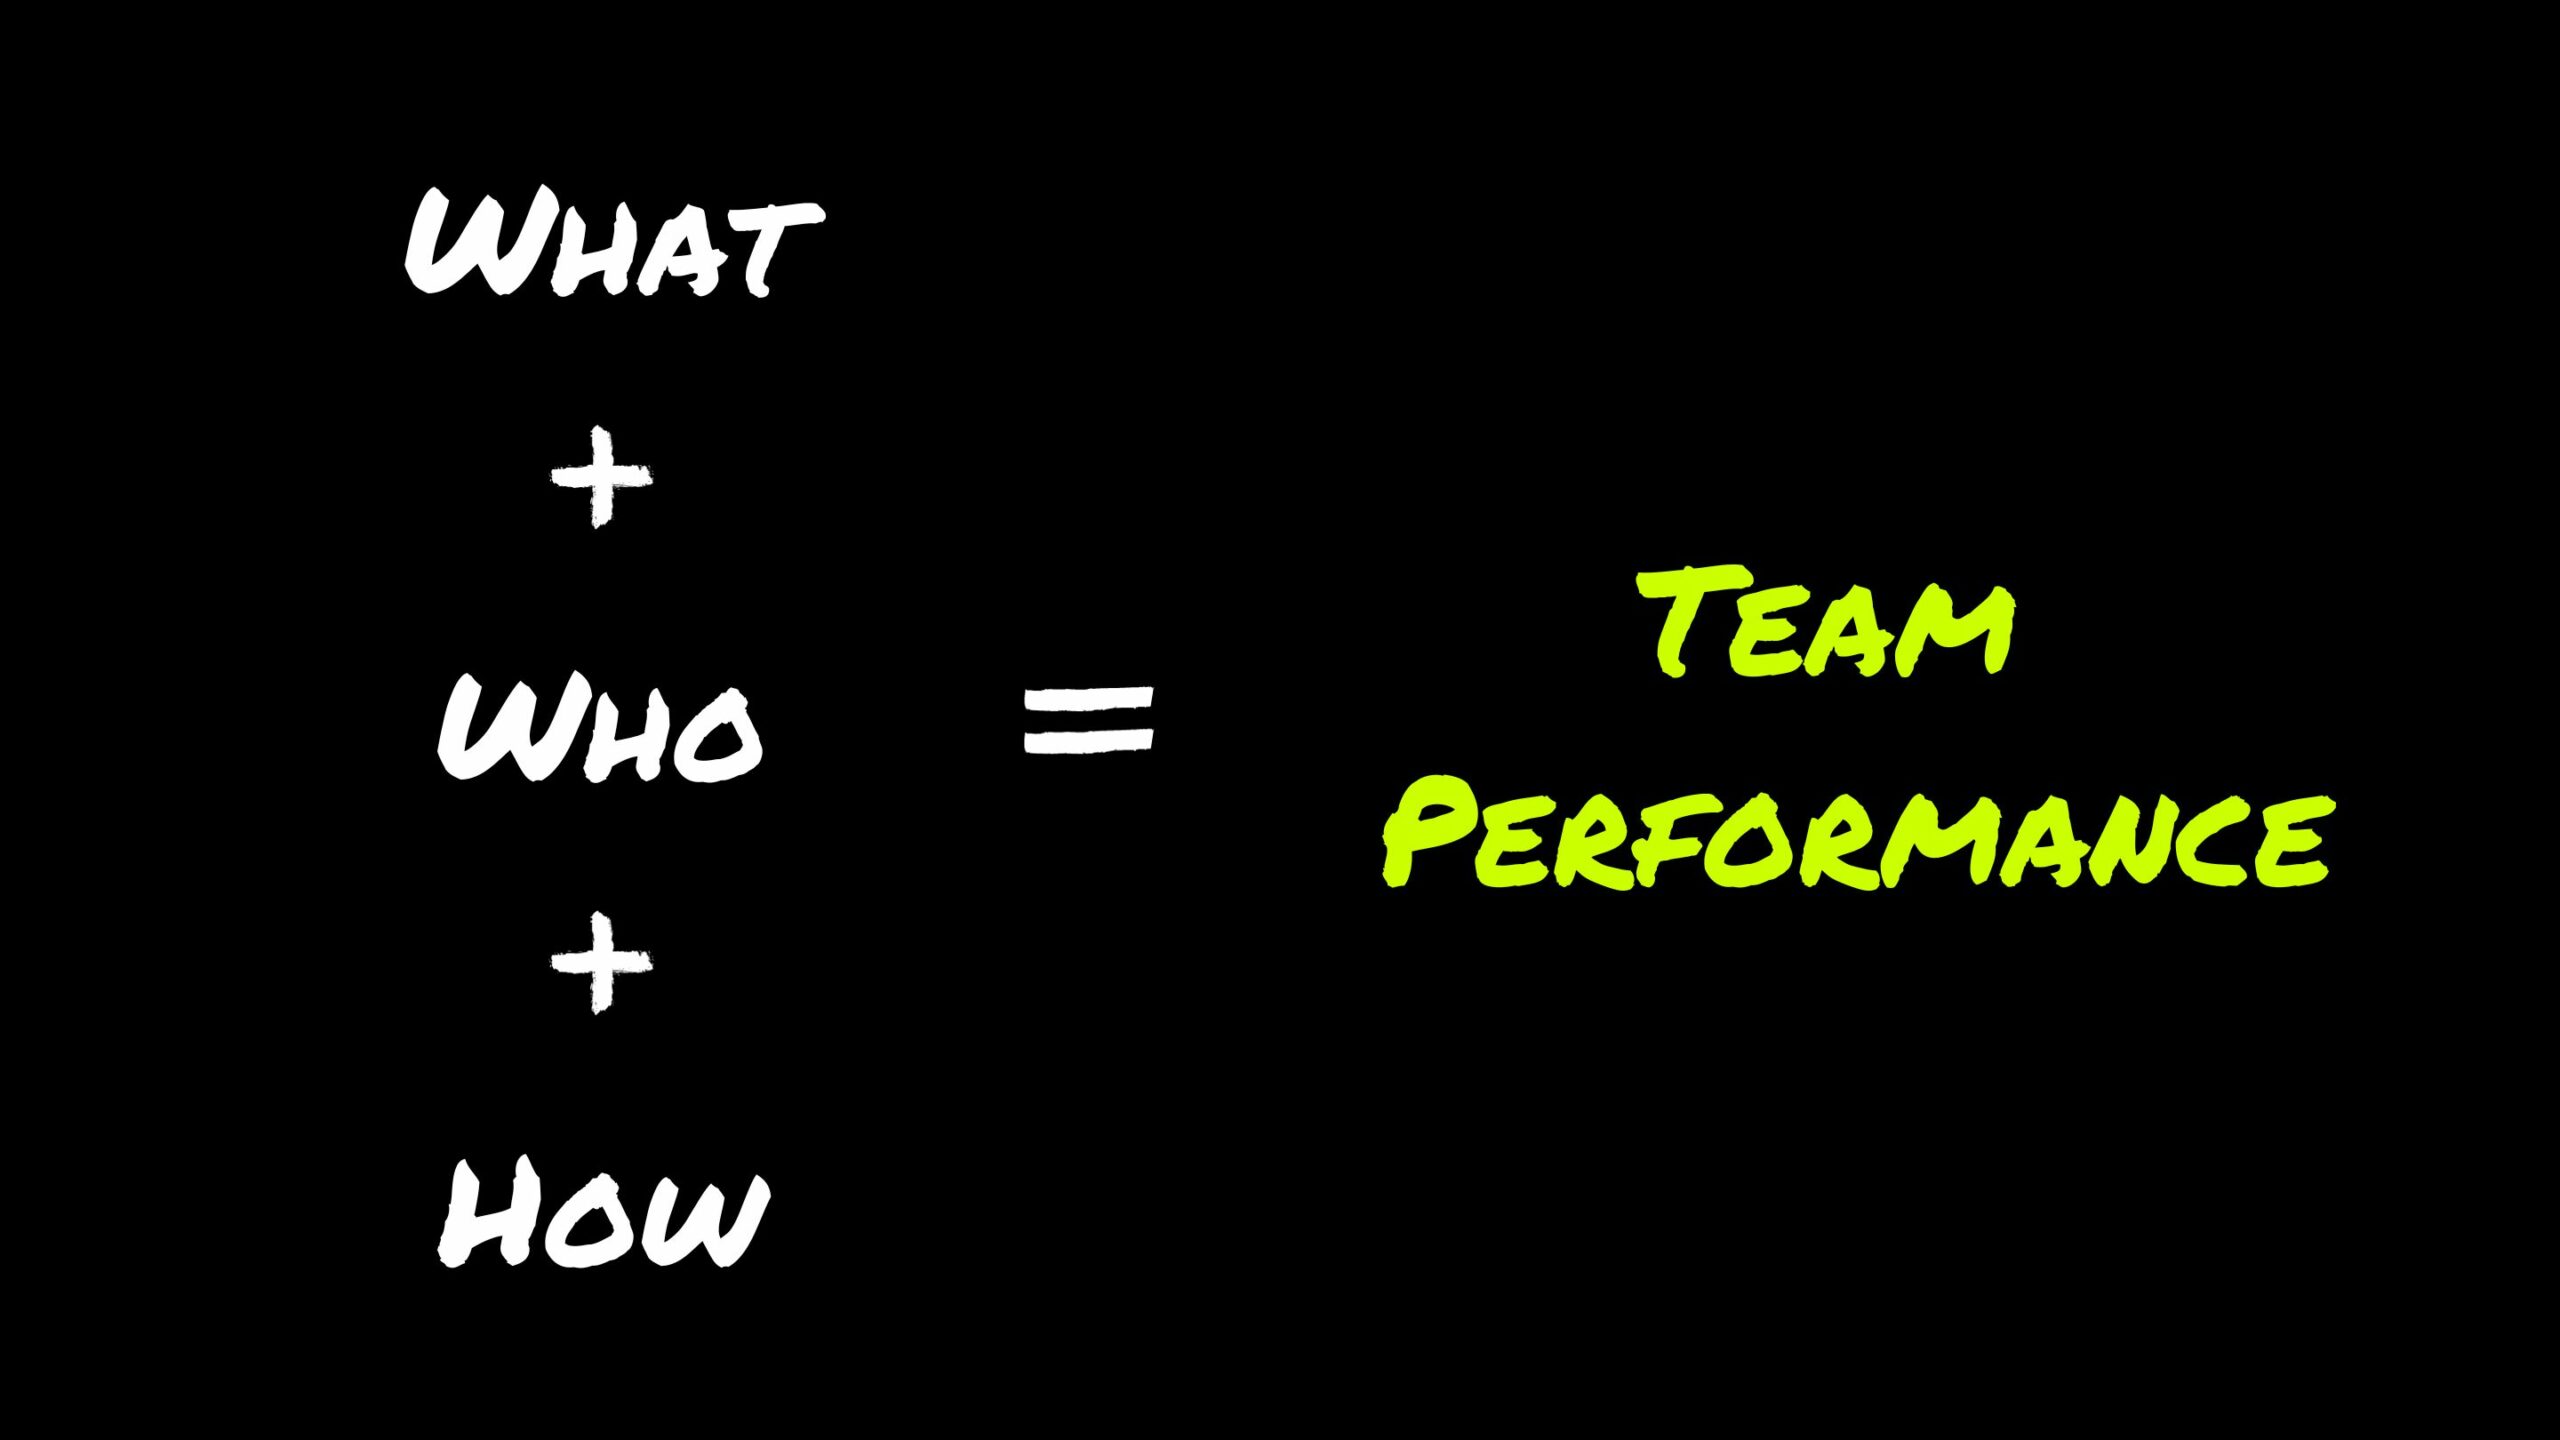 What, who, how of team performance